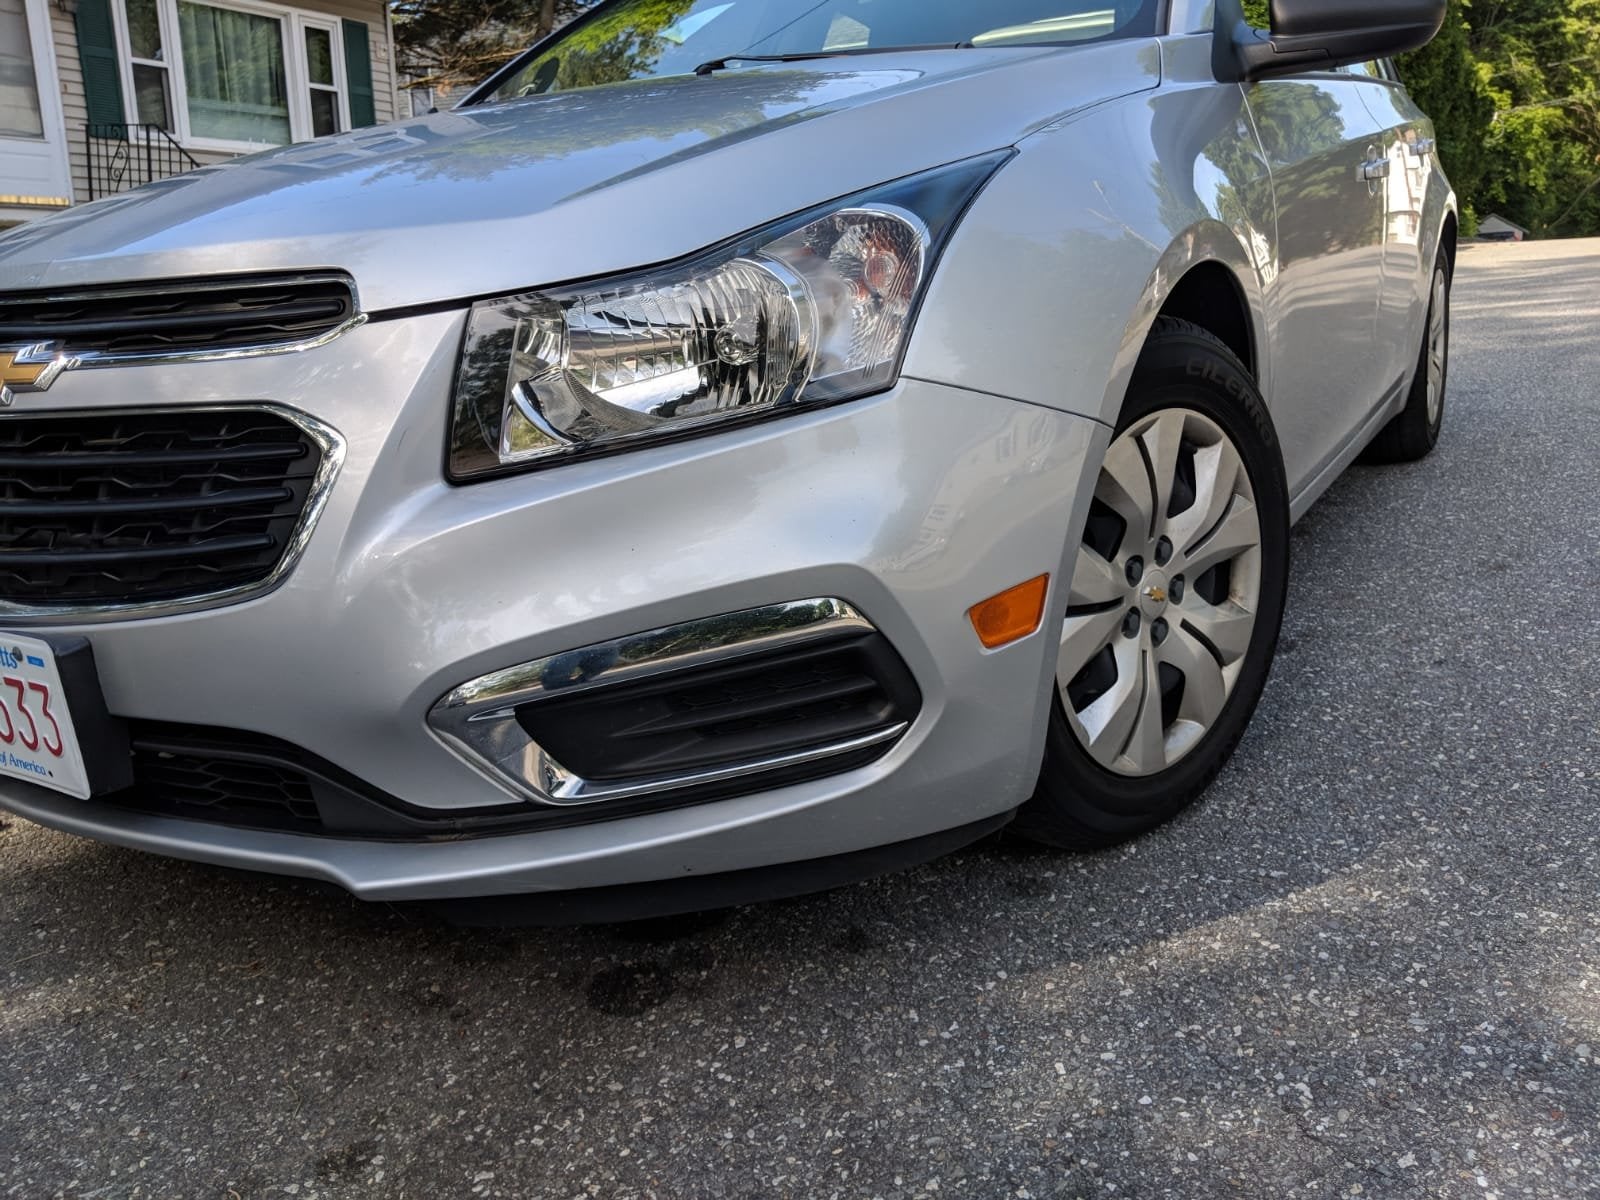 2016 Chevrolet Cruze Limited Test Drive Review - CarGurus